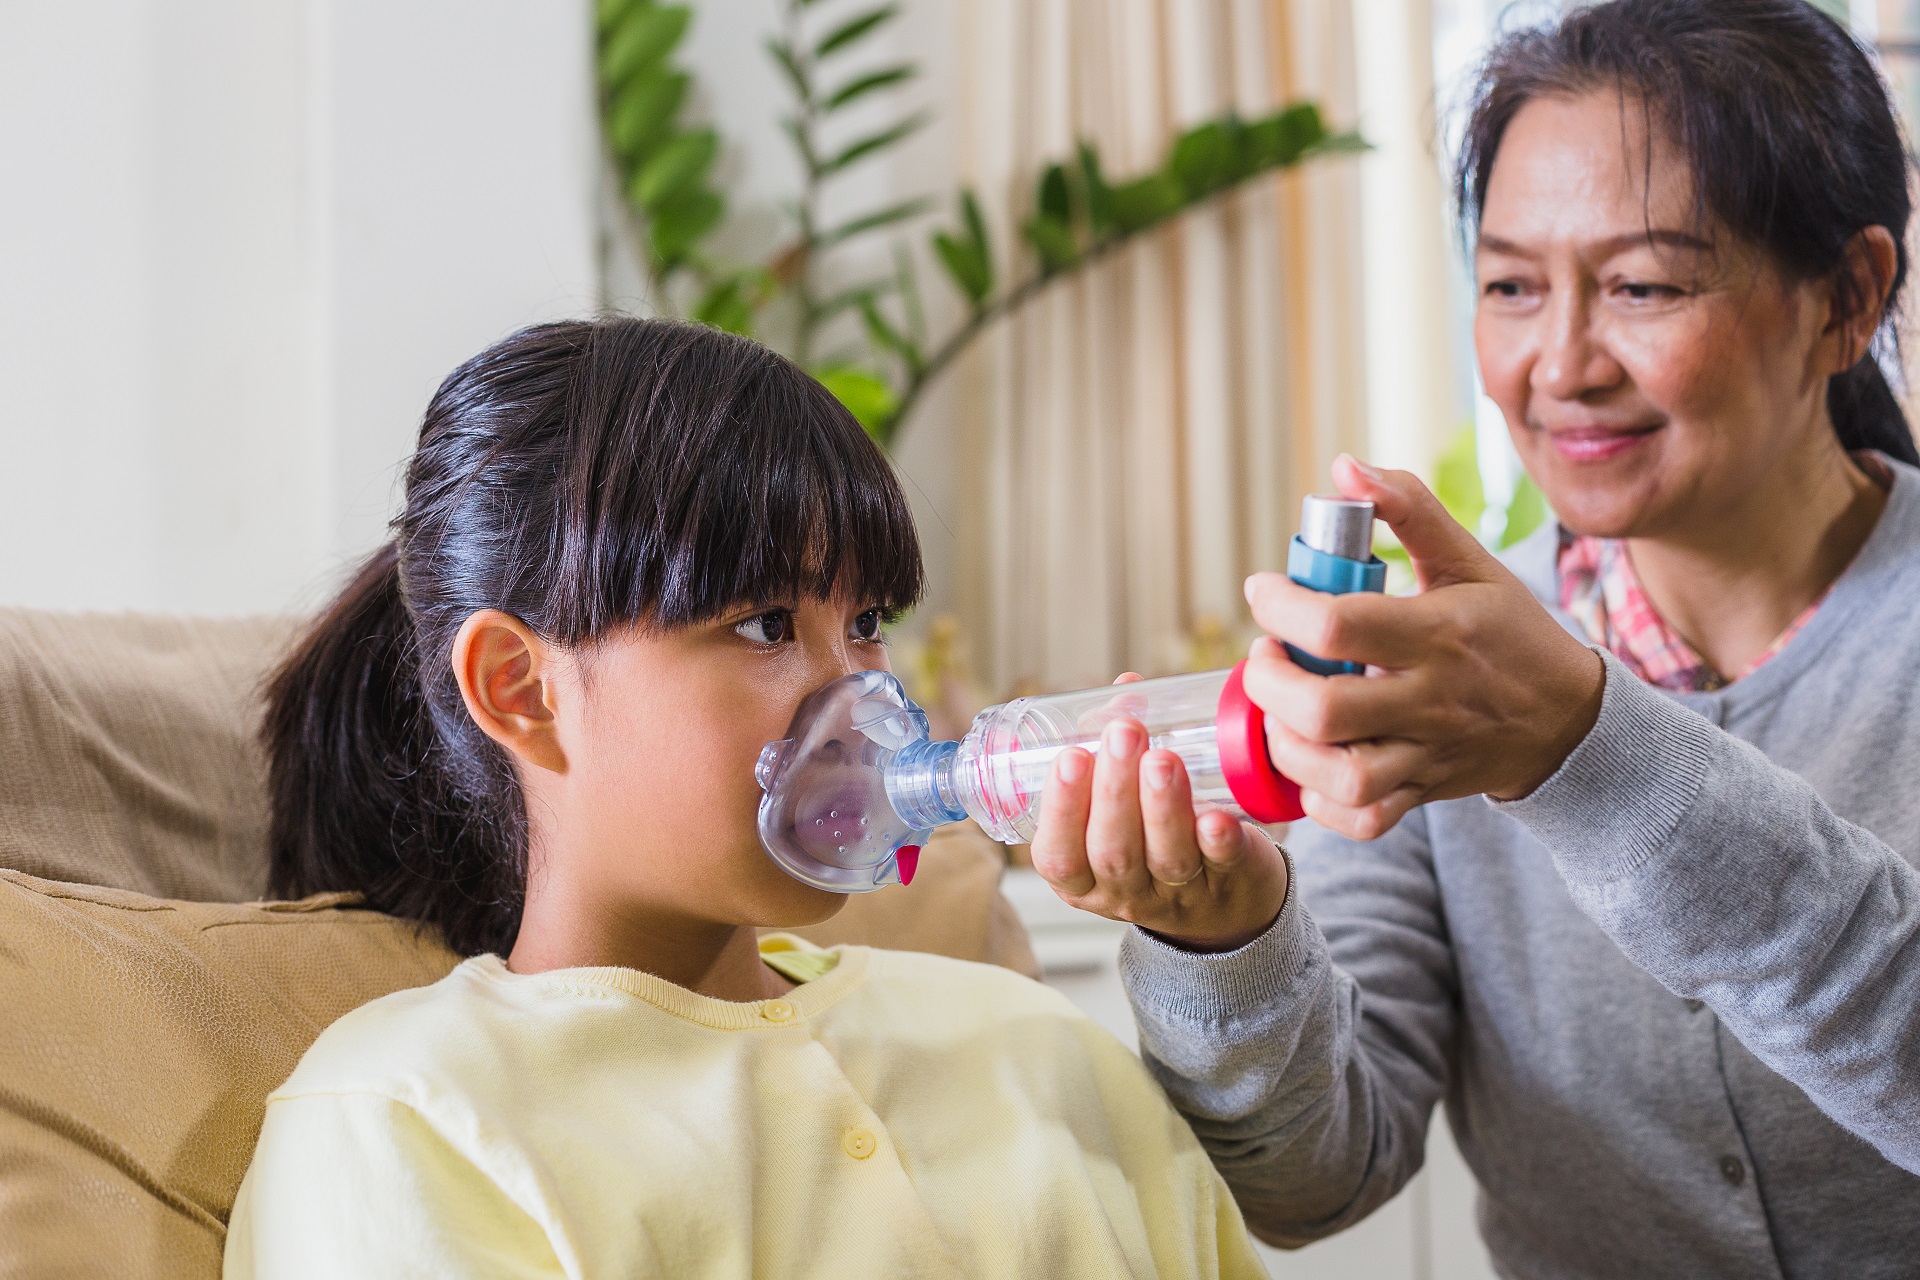 Asian mother assisting her daughter to get help with asthma inhaler spacer while sitting on sofa in living room at home